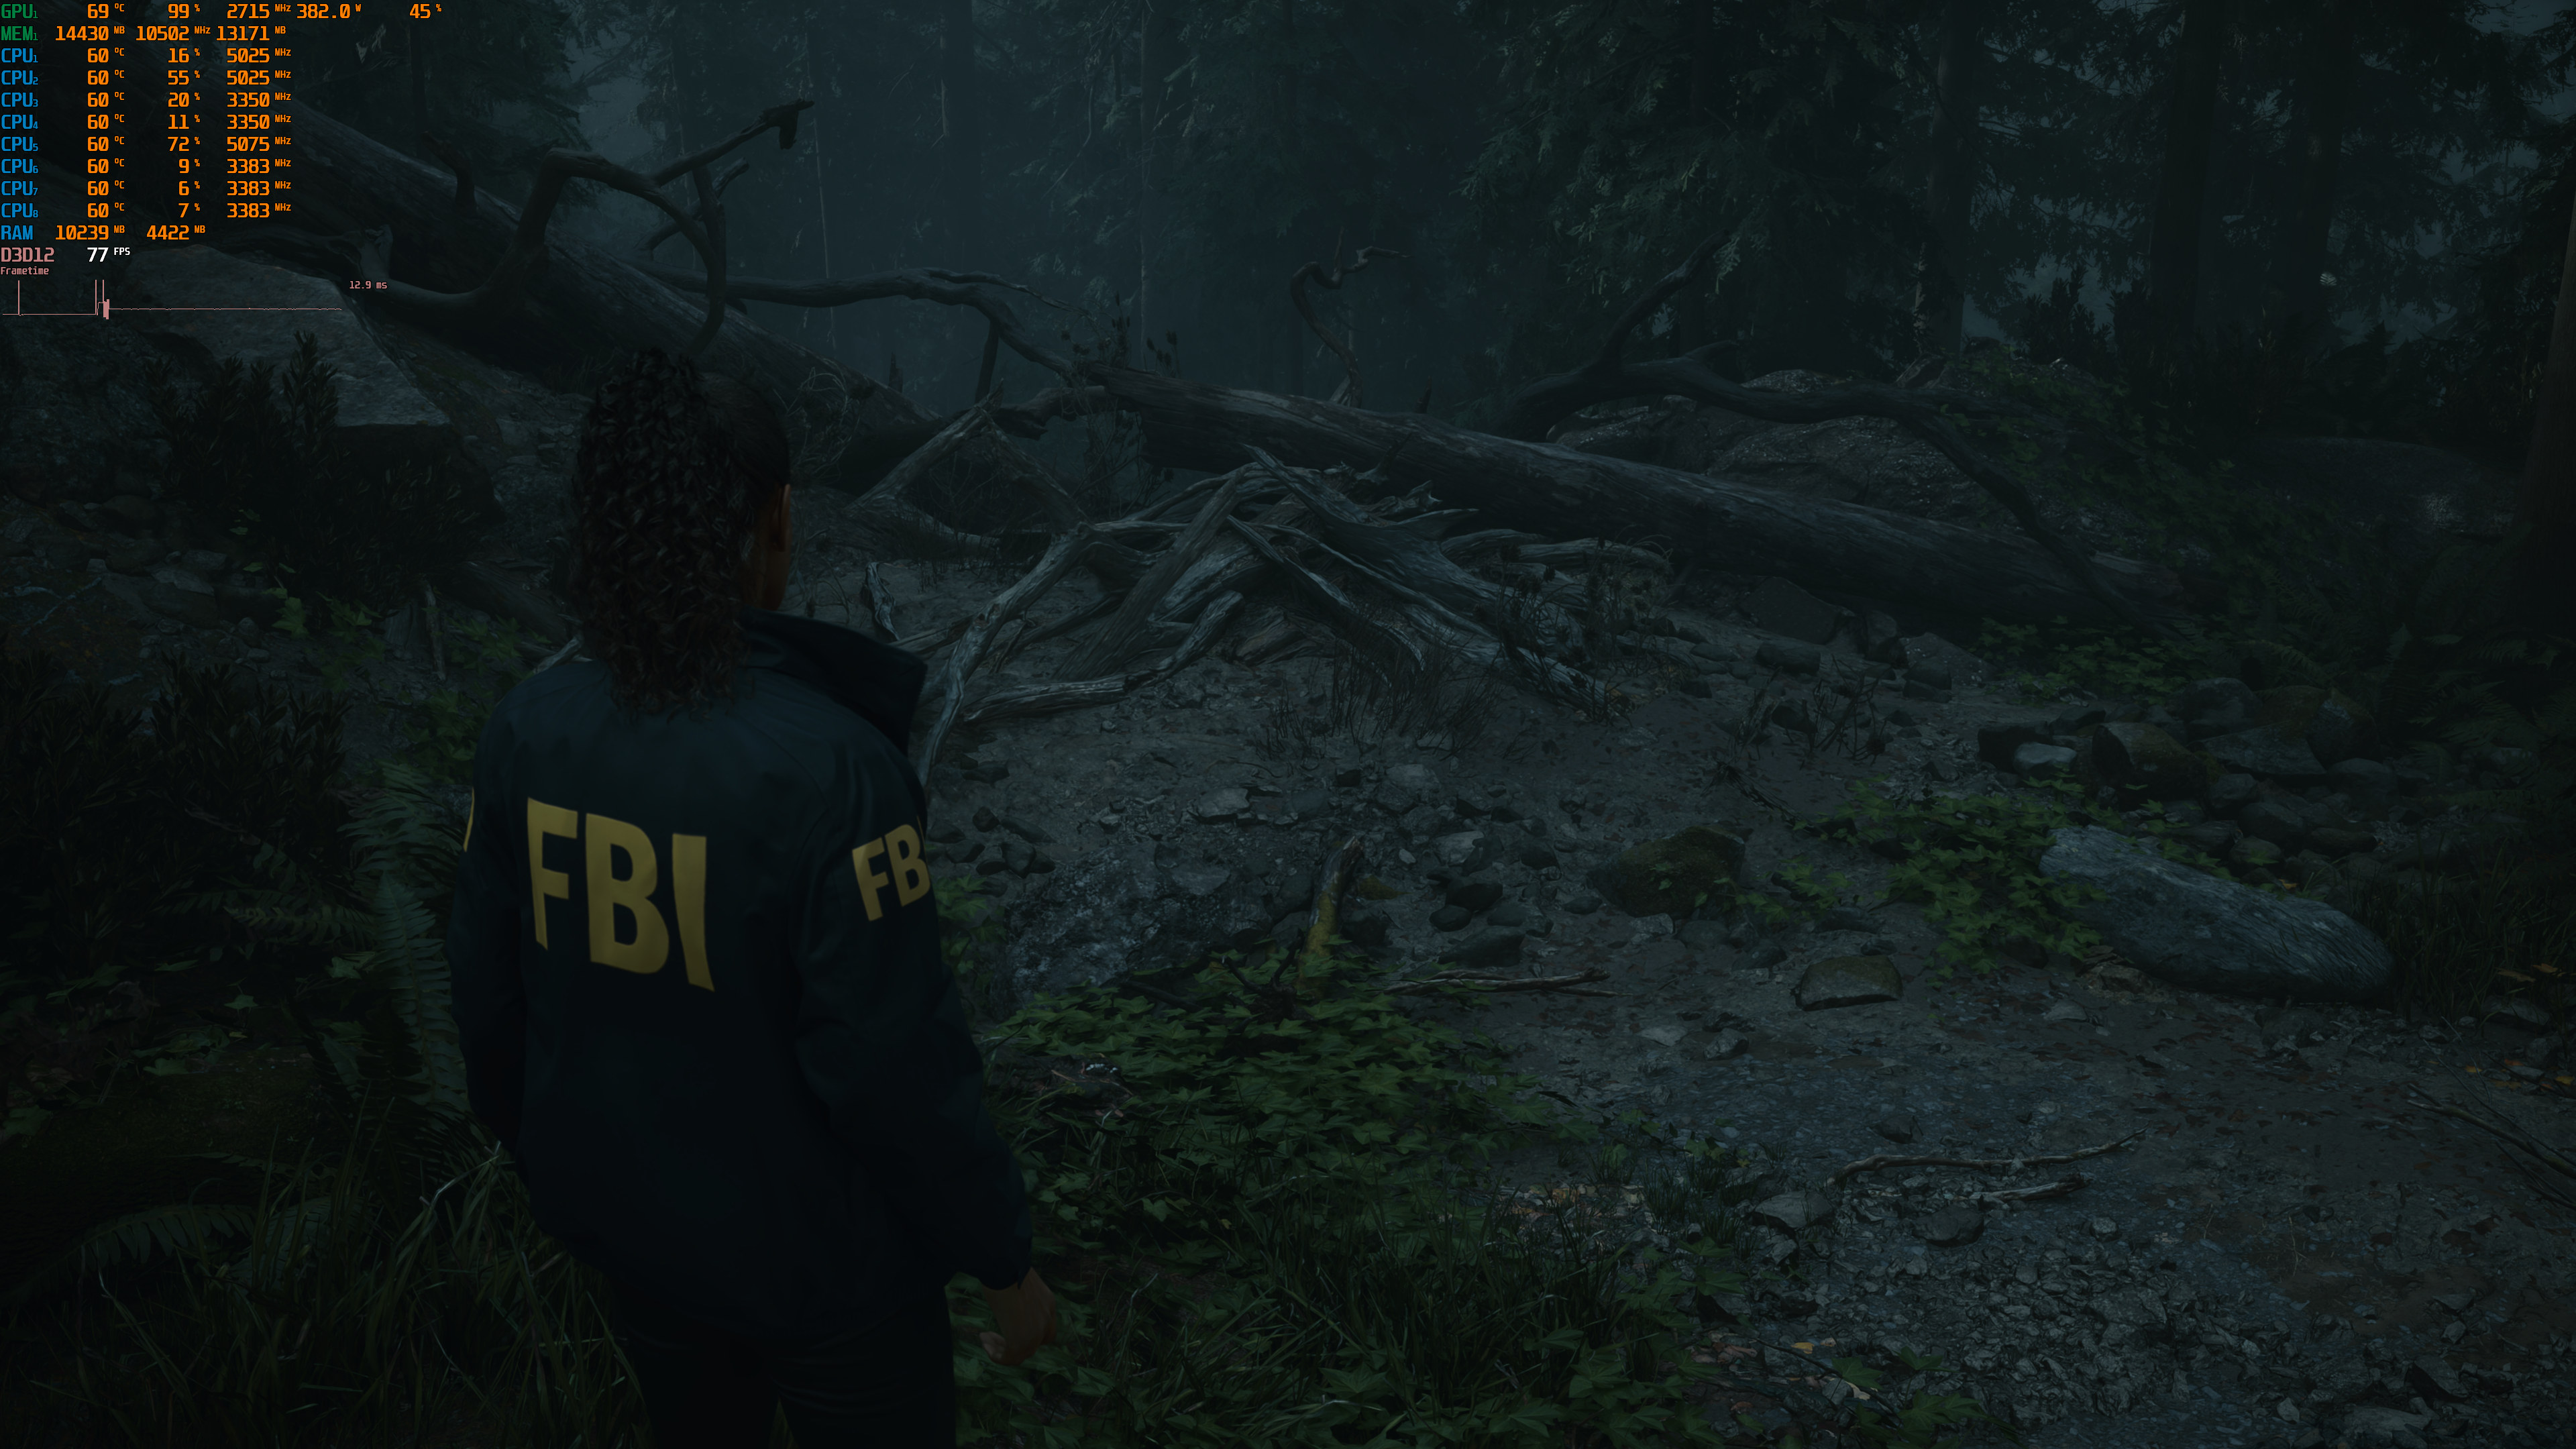 Alan Wake 2 PC Performance Impressions: NVIDIA DLSS 3.5 With Path